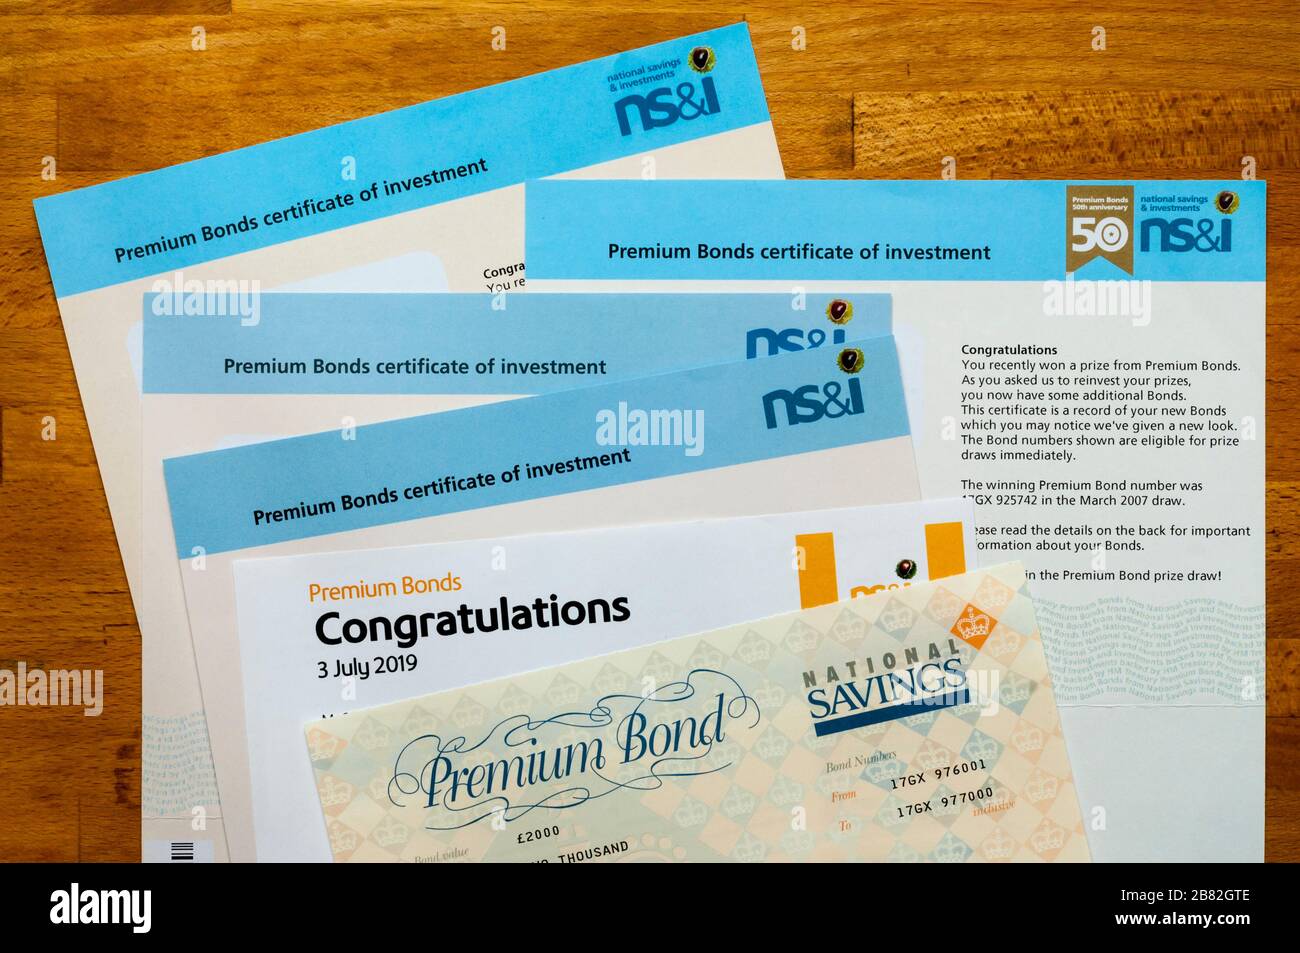 A selection of Premium Bonds certificates and Congratulations letter. Stock Photo